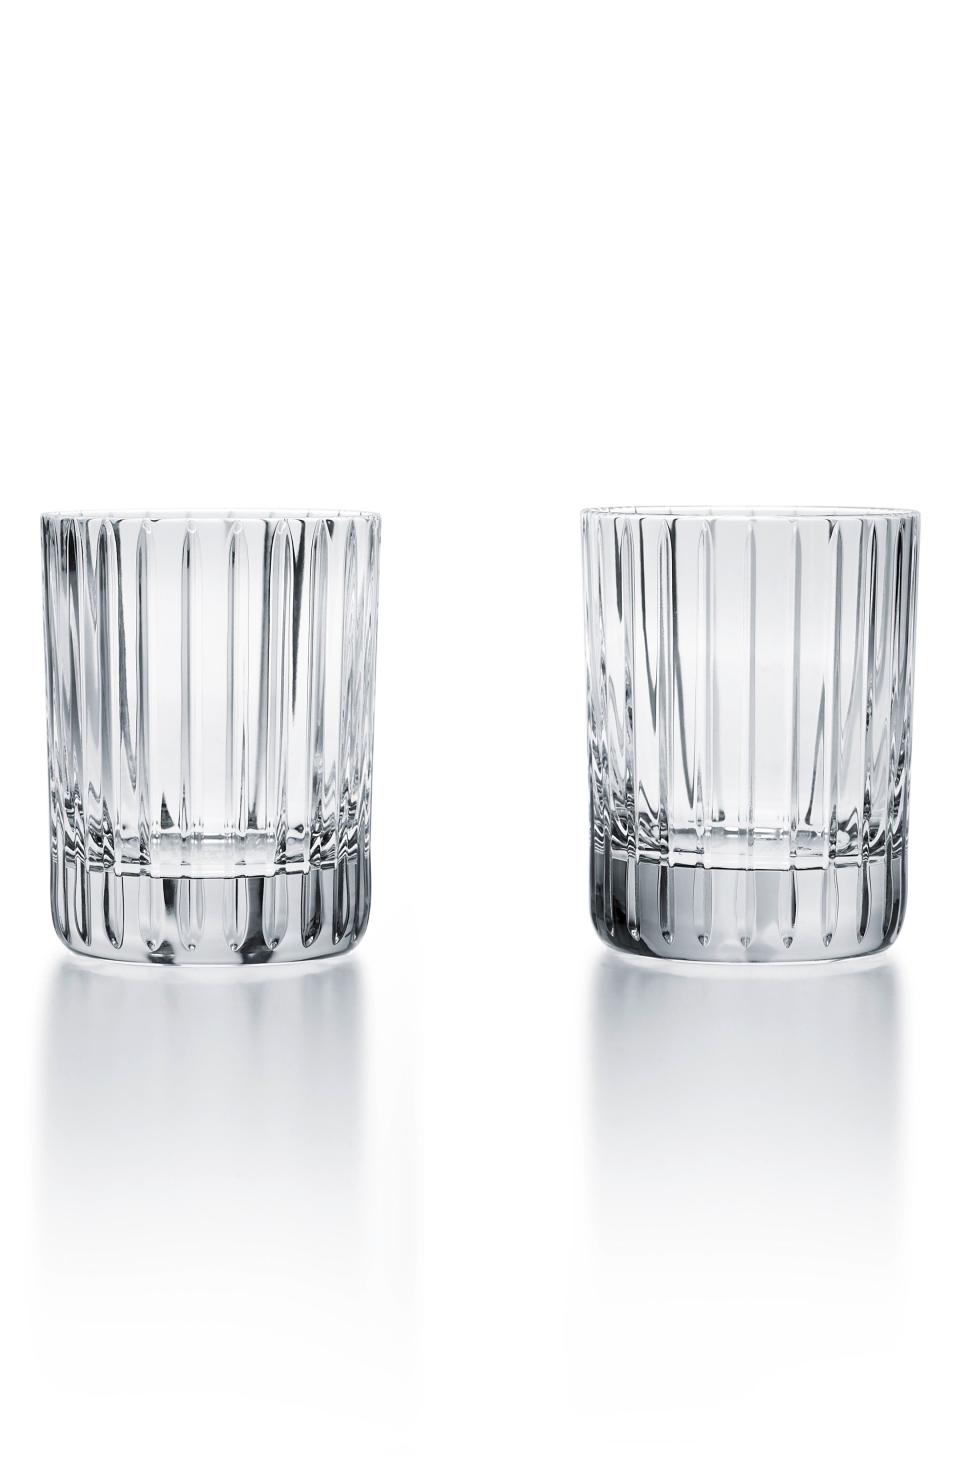 Baccarat Harmonie 1 Set of 2 Lead Crystal Tumblers in Clear at Nordstrom